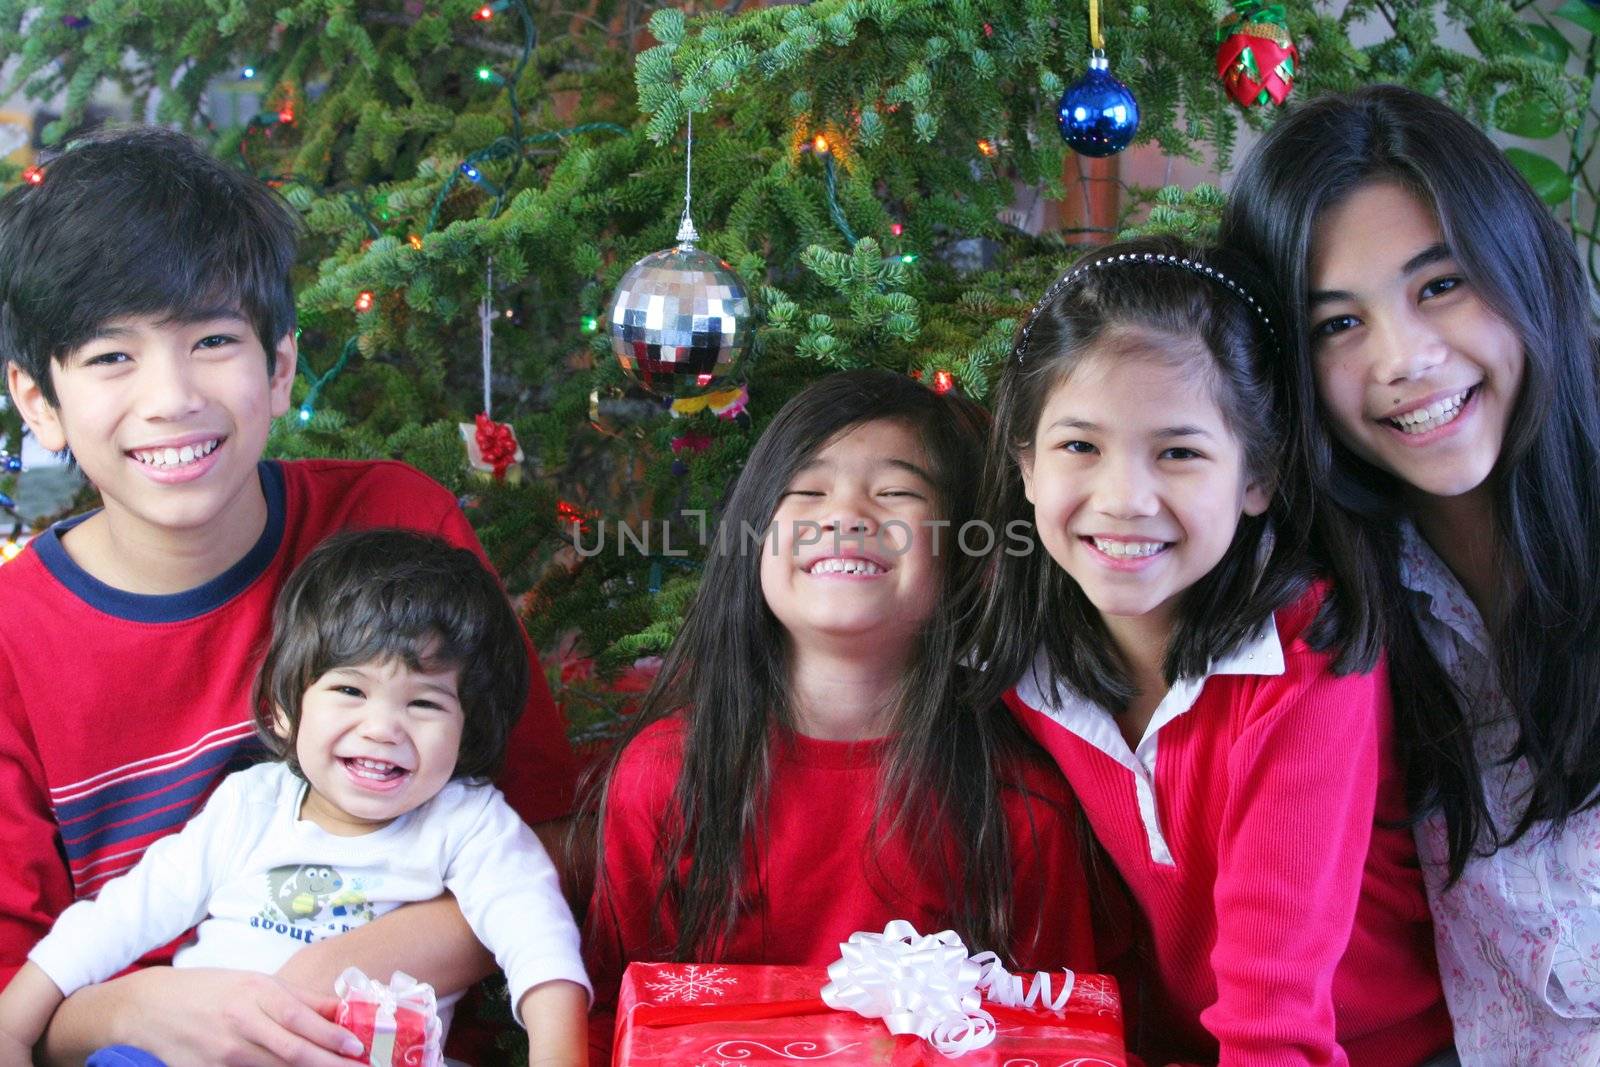 Five siblings smiling and holding Christmas presents in front of the Christmas tree.